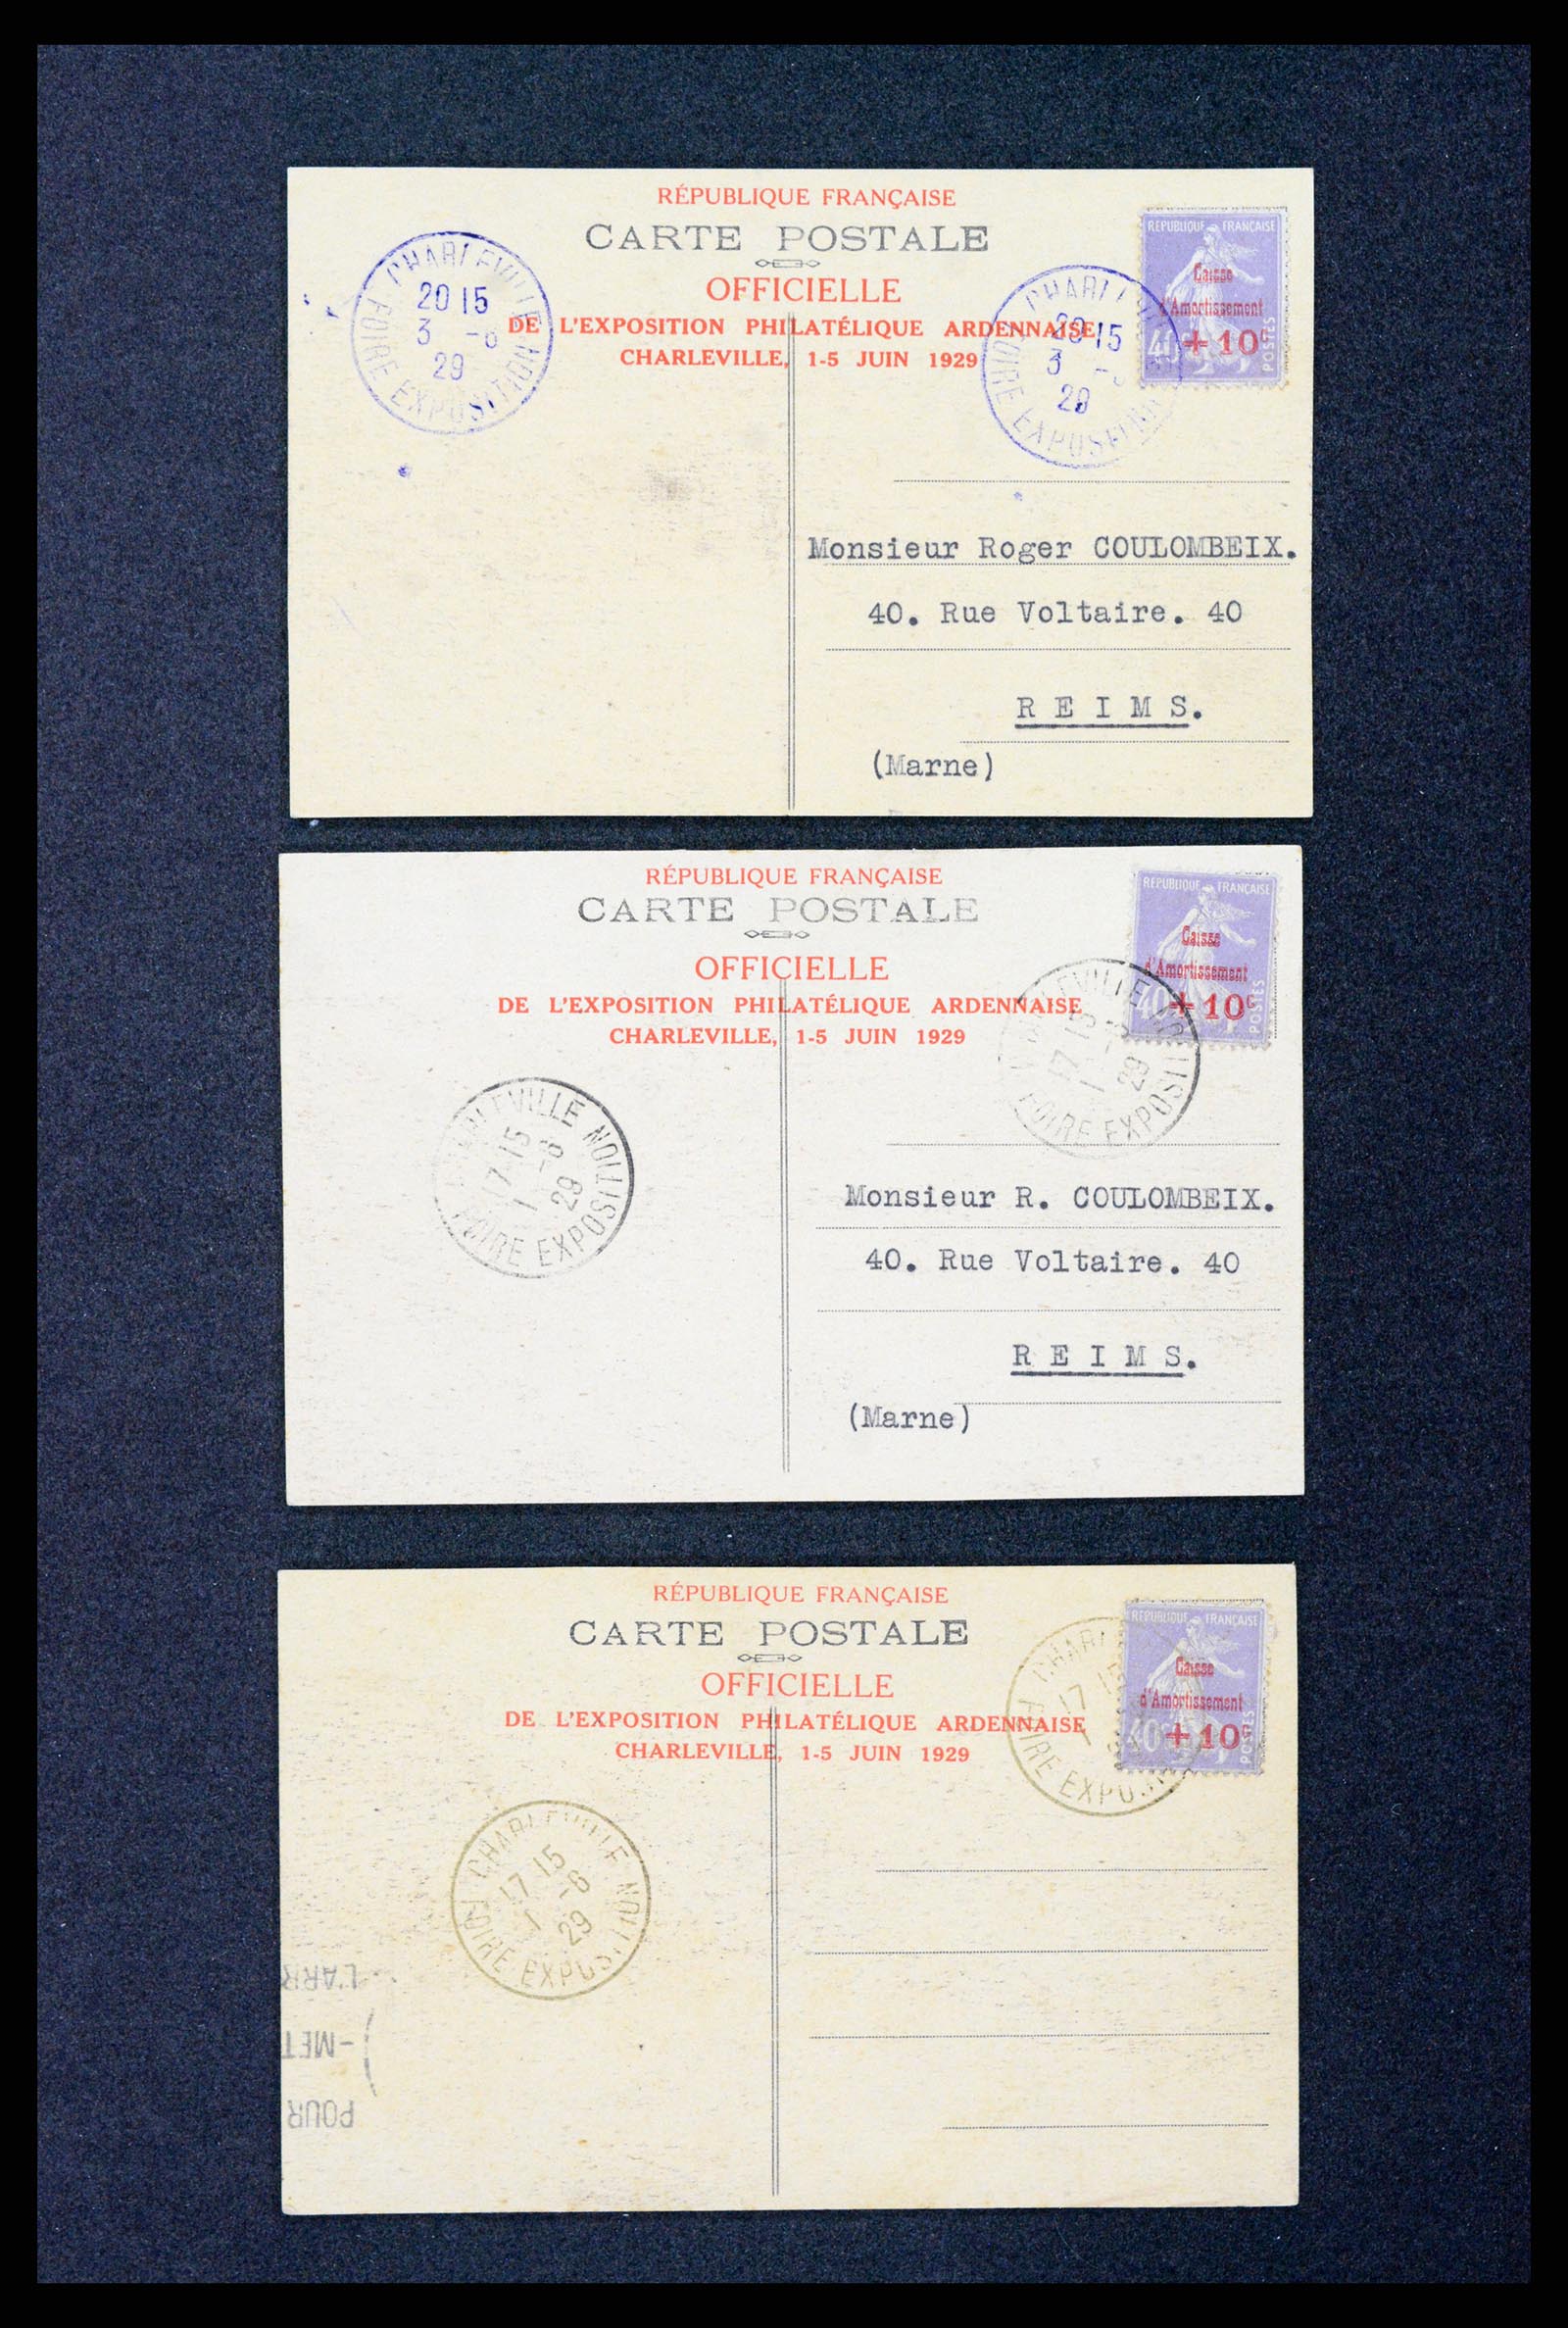 36319 001 - Stamp collection 36319 France covers 1928-1931.